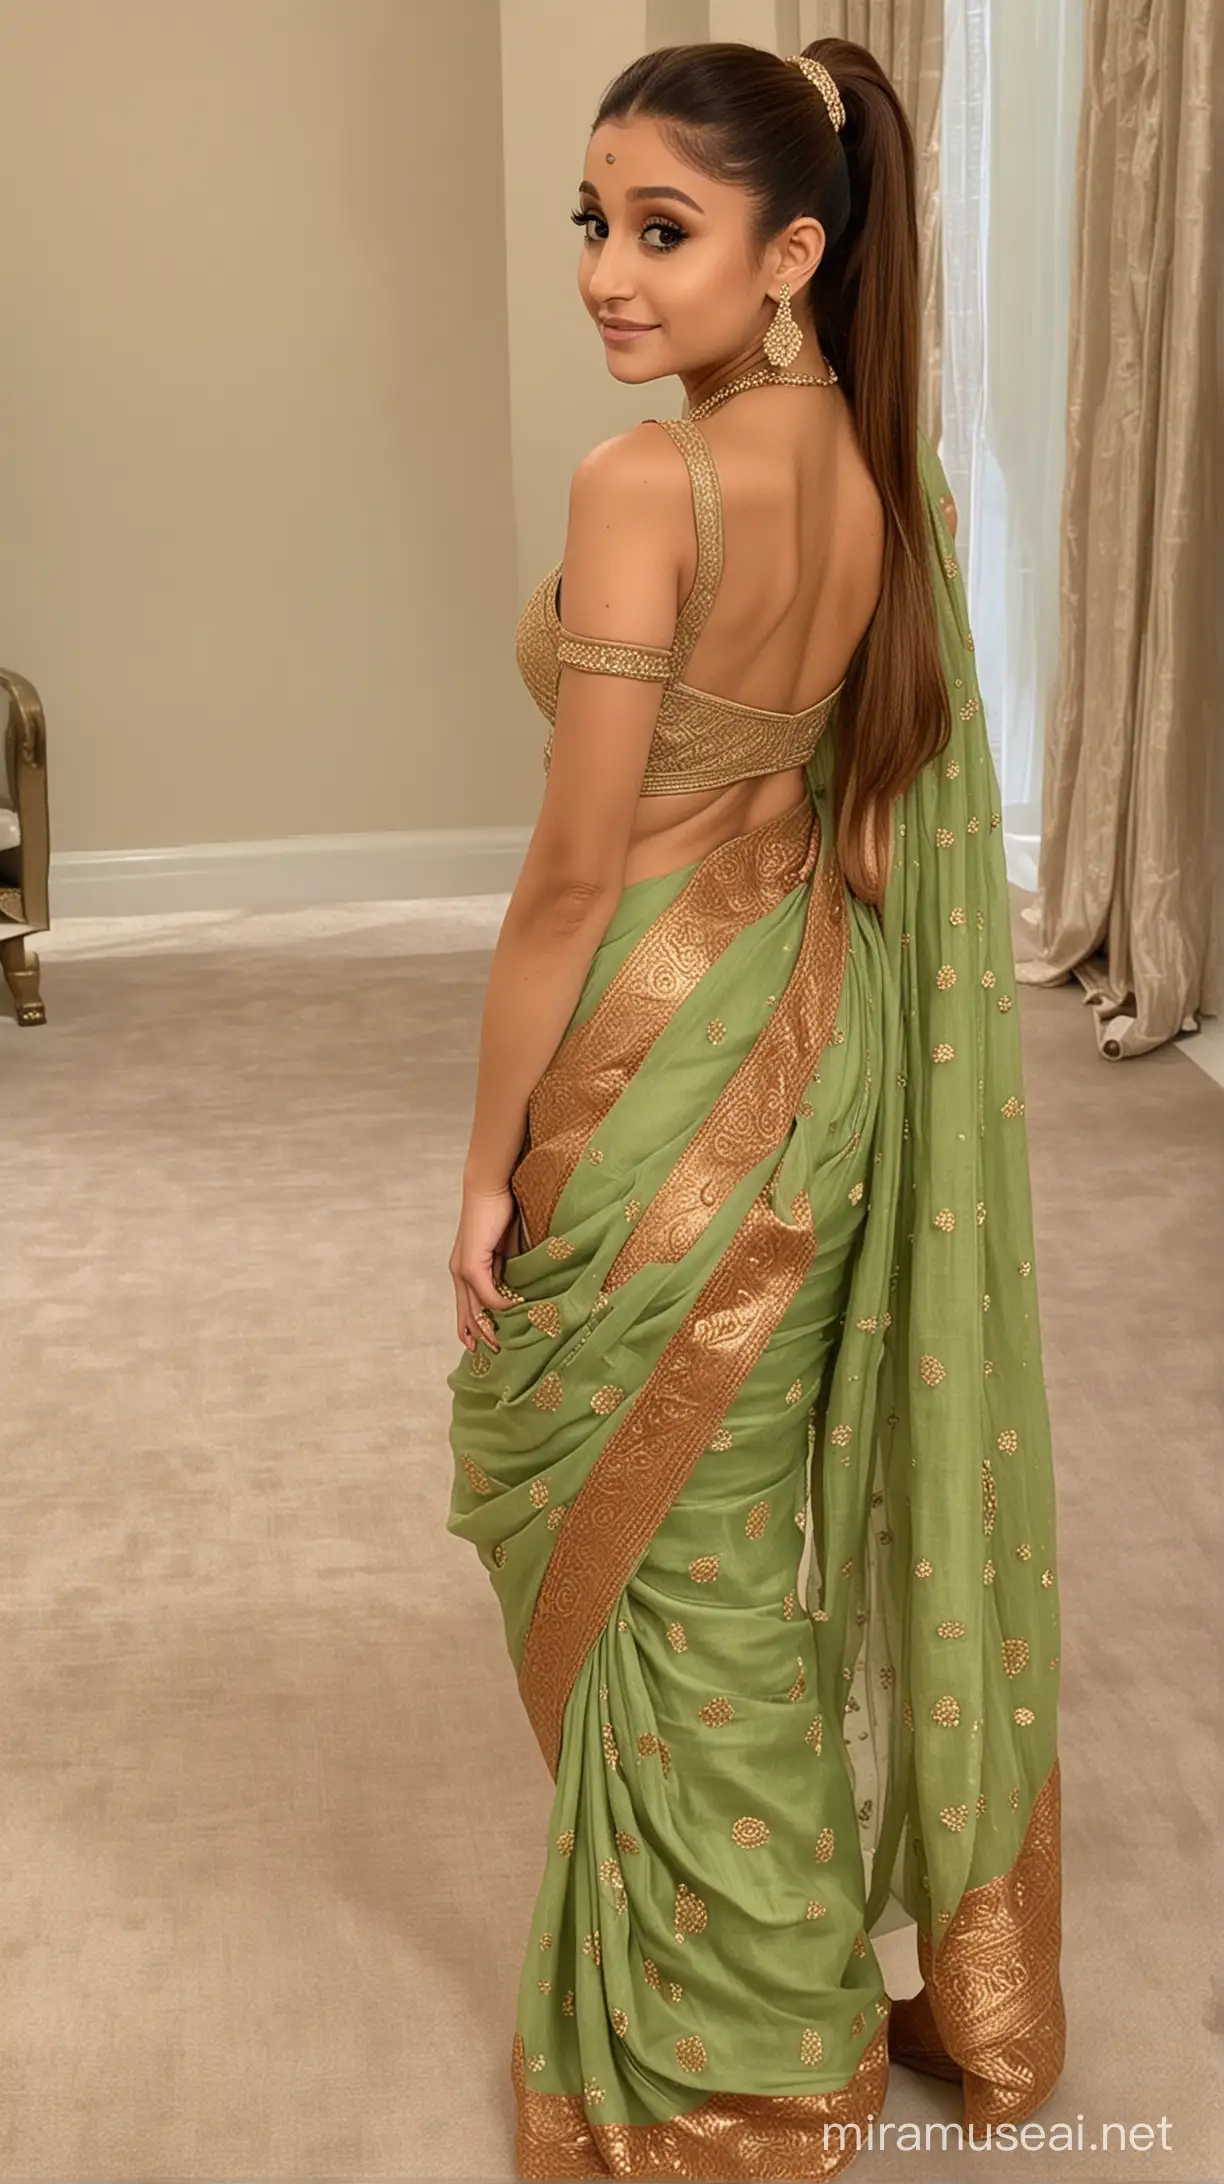 Ariana Grande in Indian style saree with backless blouse